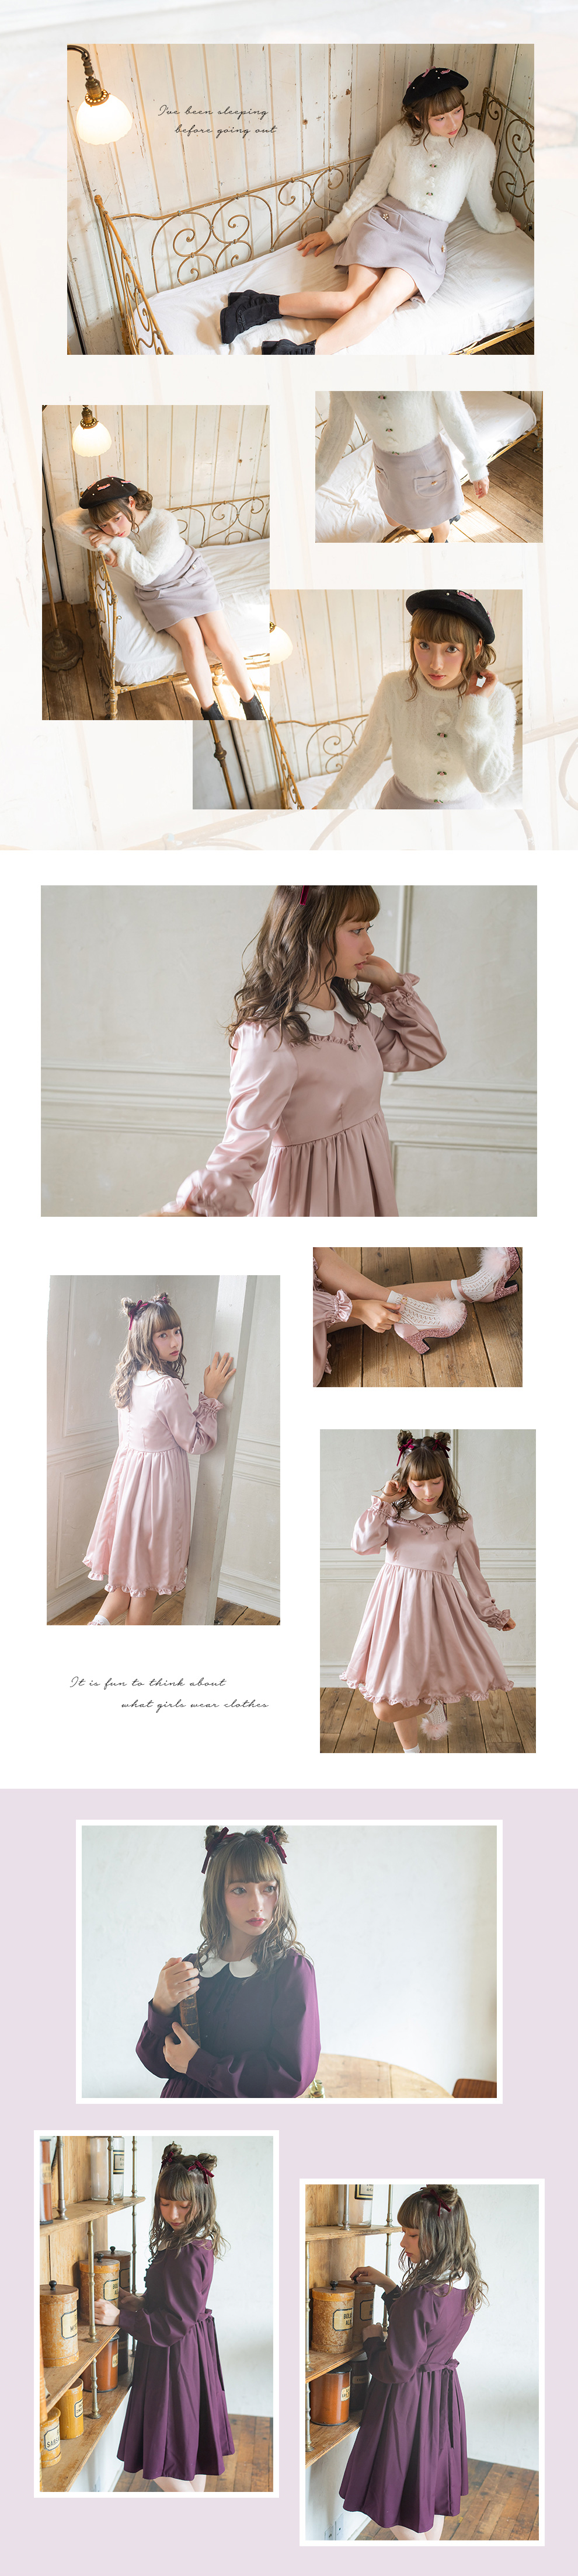 2018 WINTER GIRLY COLLECTION Vol.2